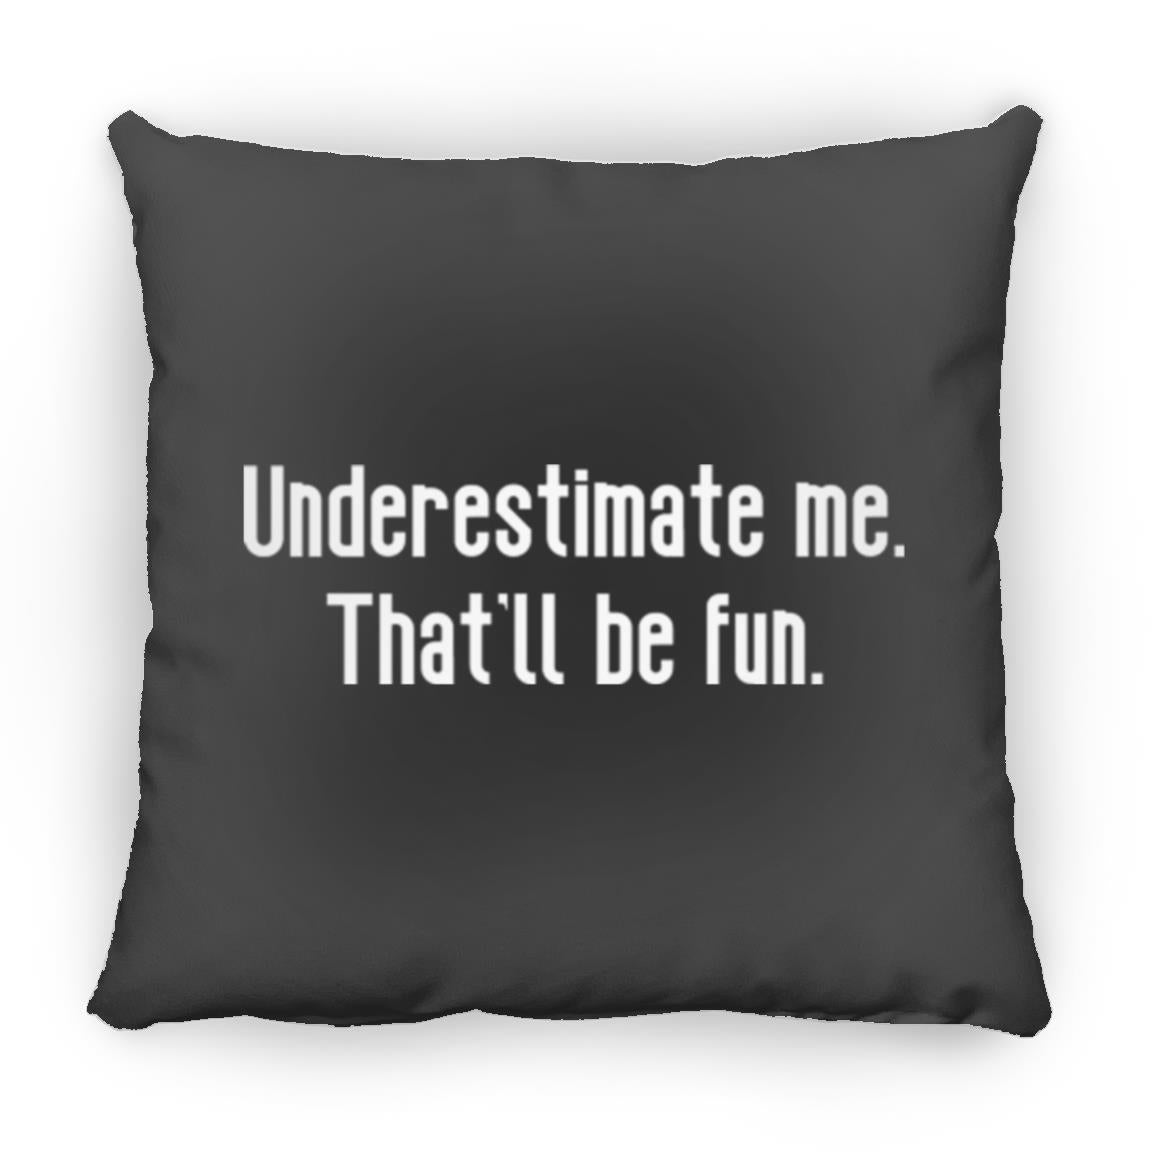 Underestimate me. That'll be fun. Throw Pillow